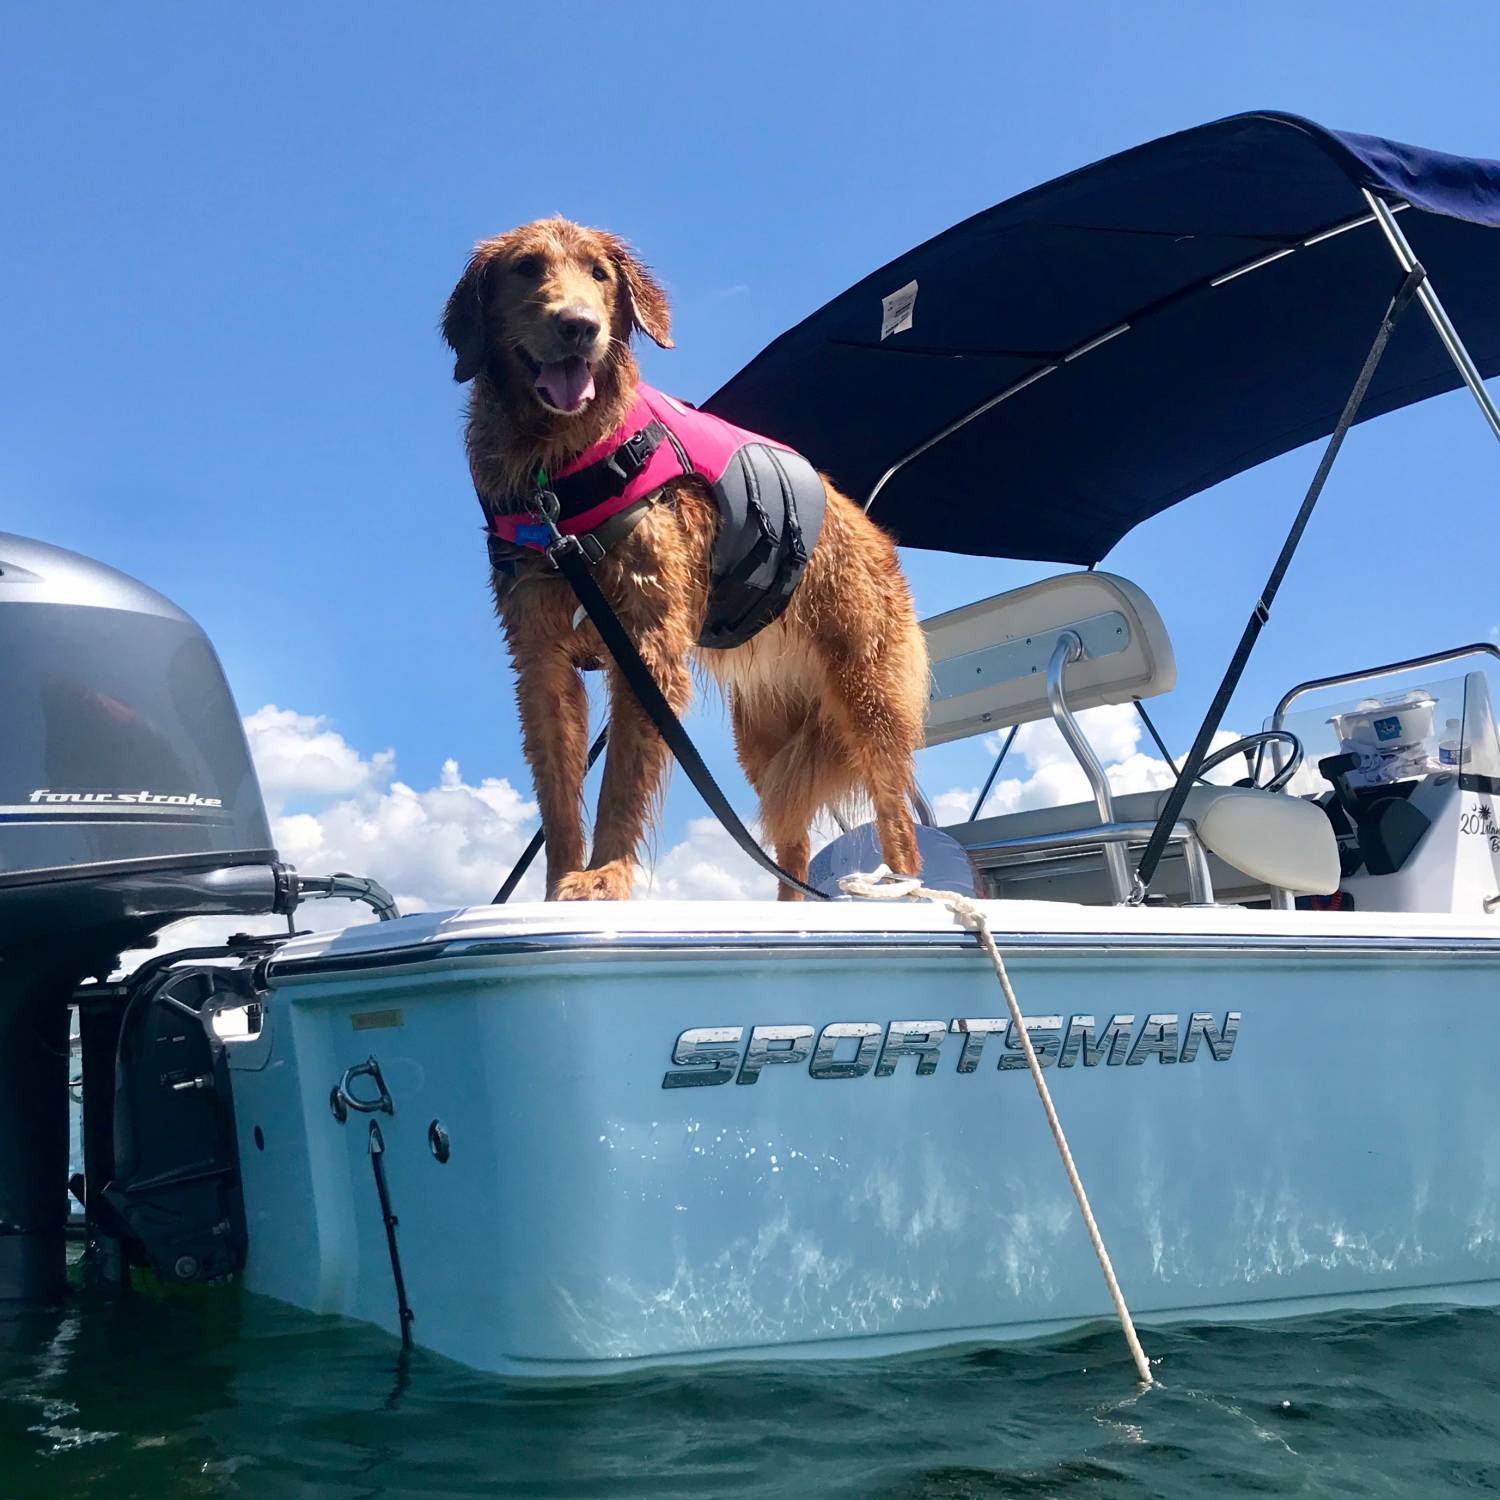 This is my 12 year old Golden Enjoying the boat. She has cancer and we cherish every moment with her...